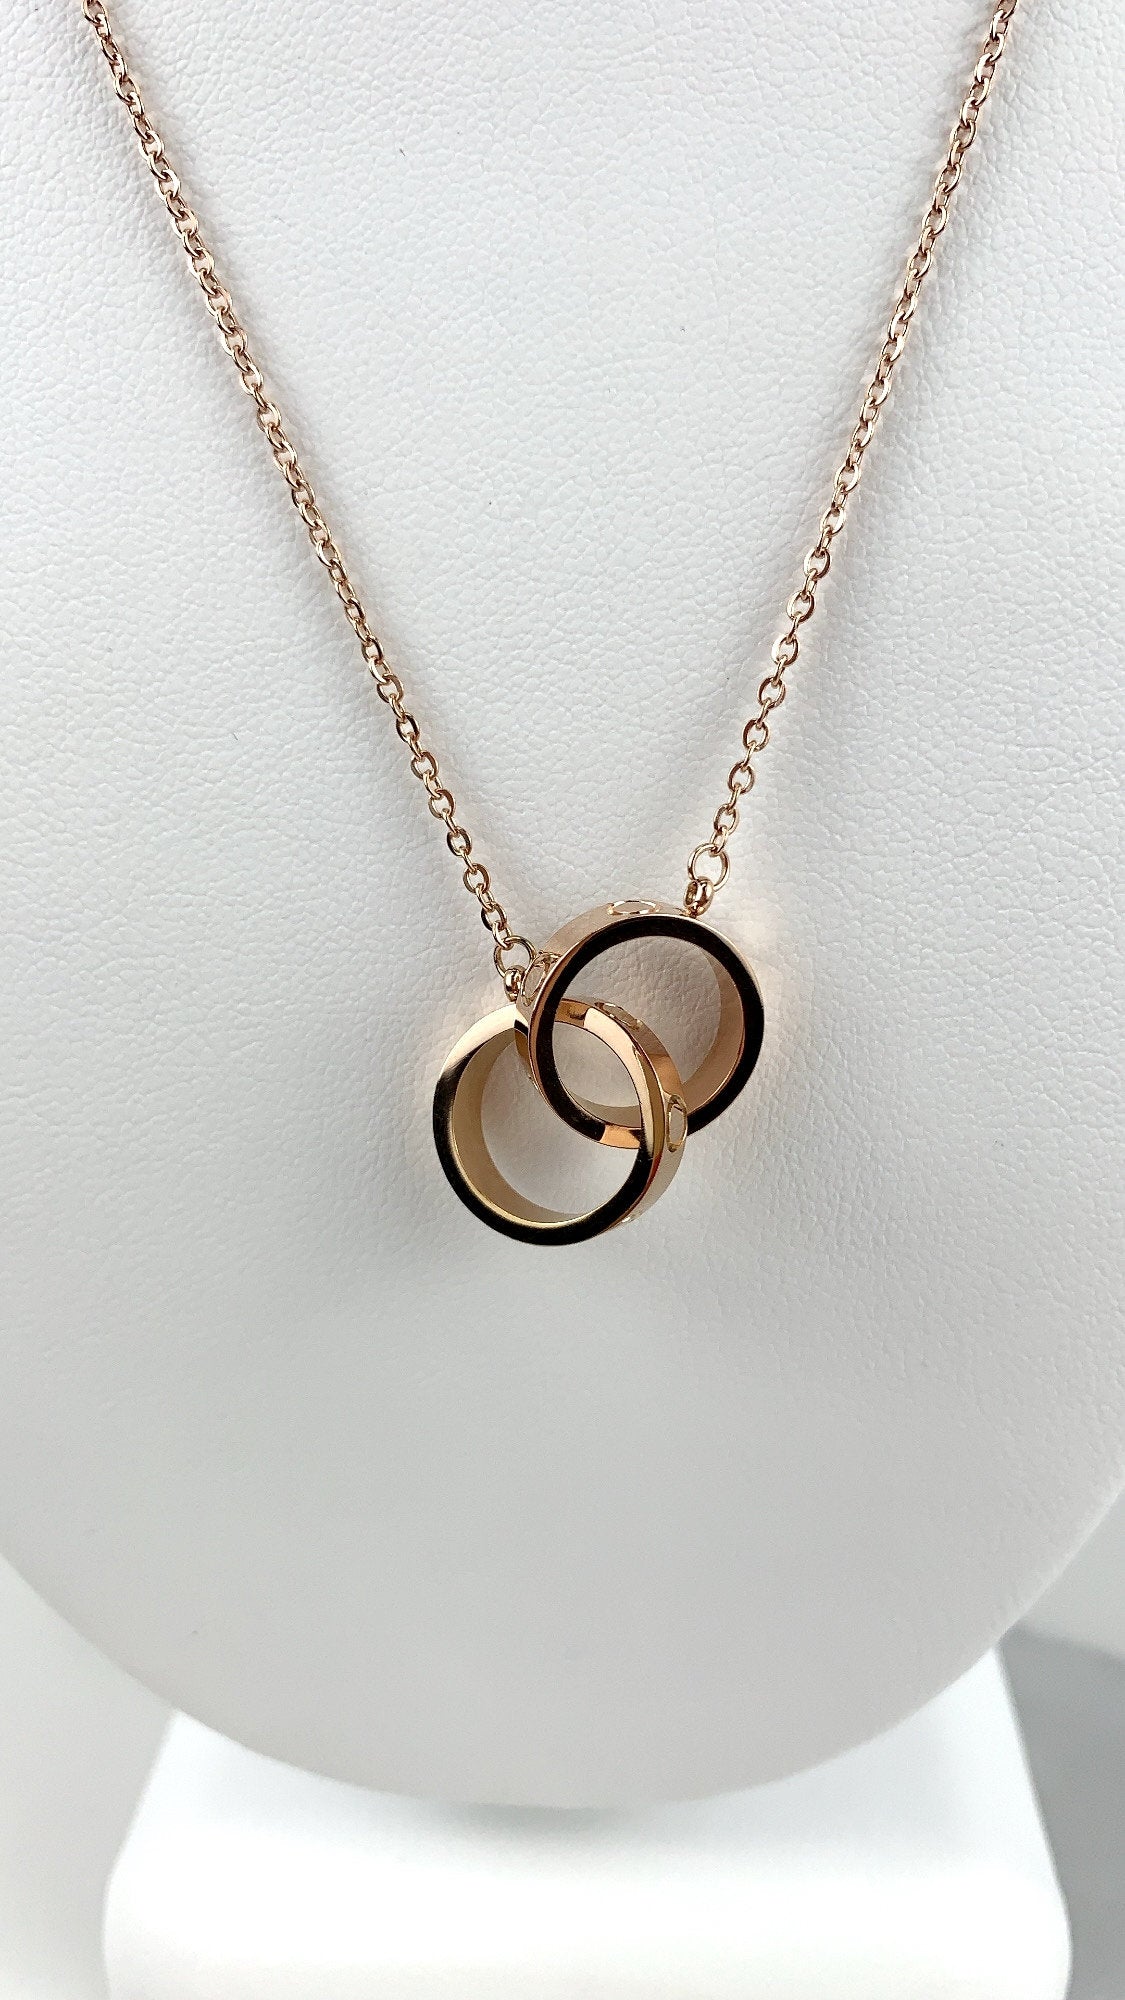 18k Rose Gold Filled Trendy, Hoops Ring Charm, Necklace ,Wholesale Jewelry Supplies